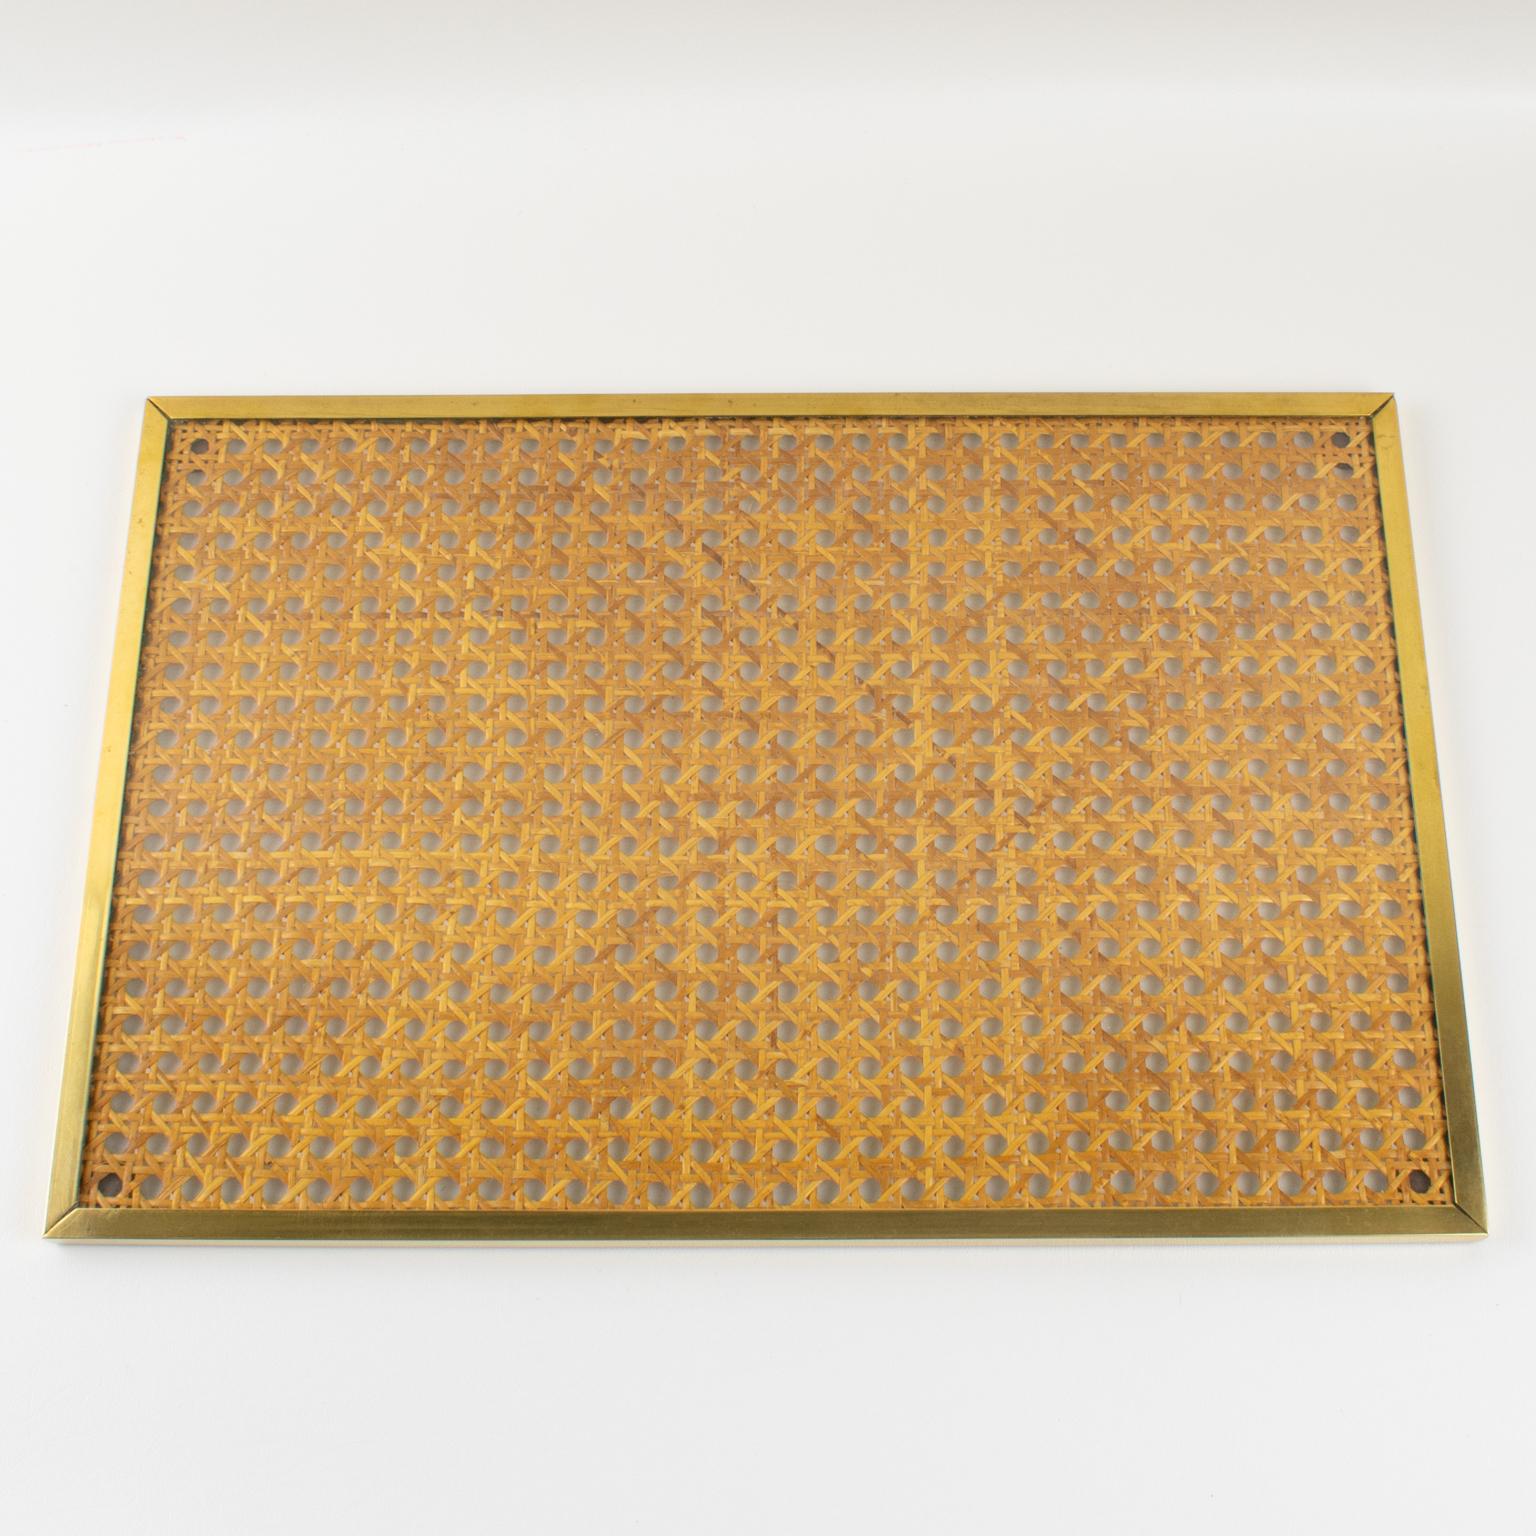 Christian Dior Home Lucite, Rattan and Brass 6 Placemats or Chargers Set For Sale 6